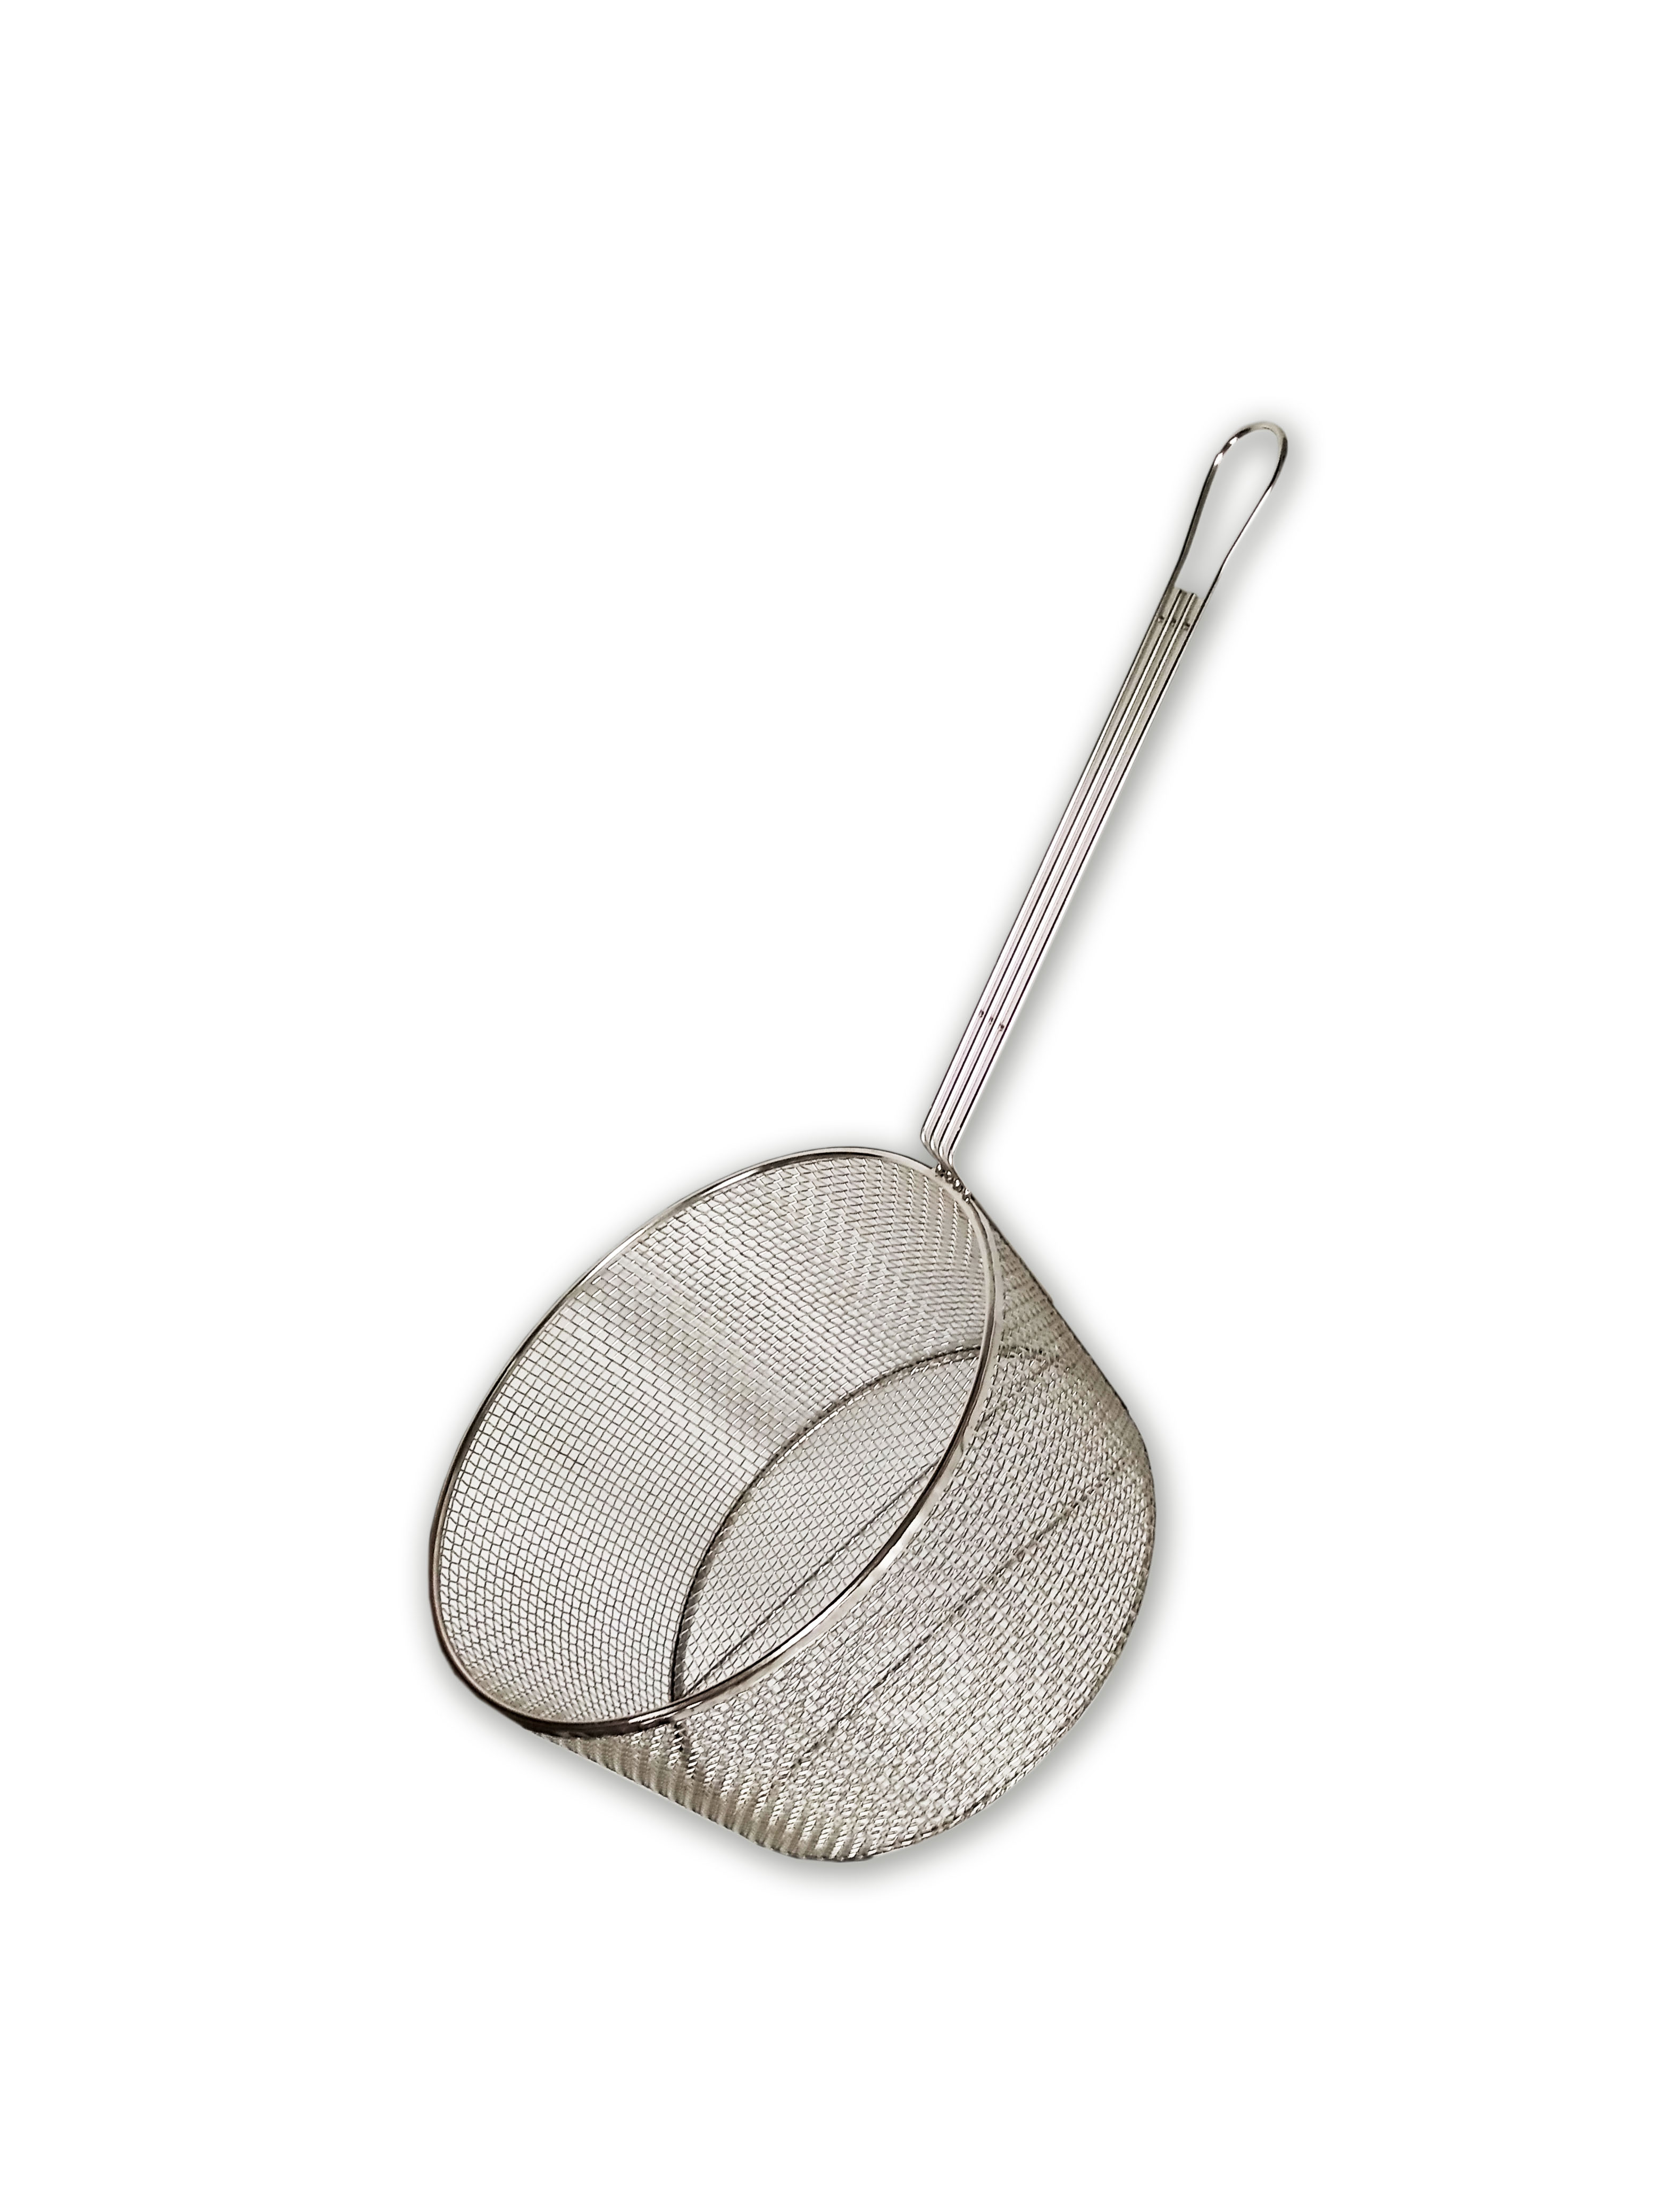 mesh-basket-with-stainless-steel-handle-30-cm